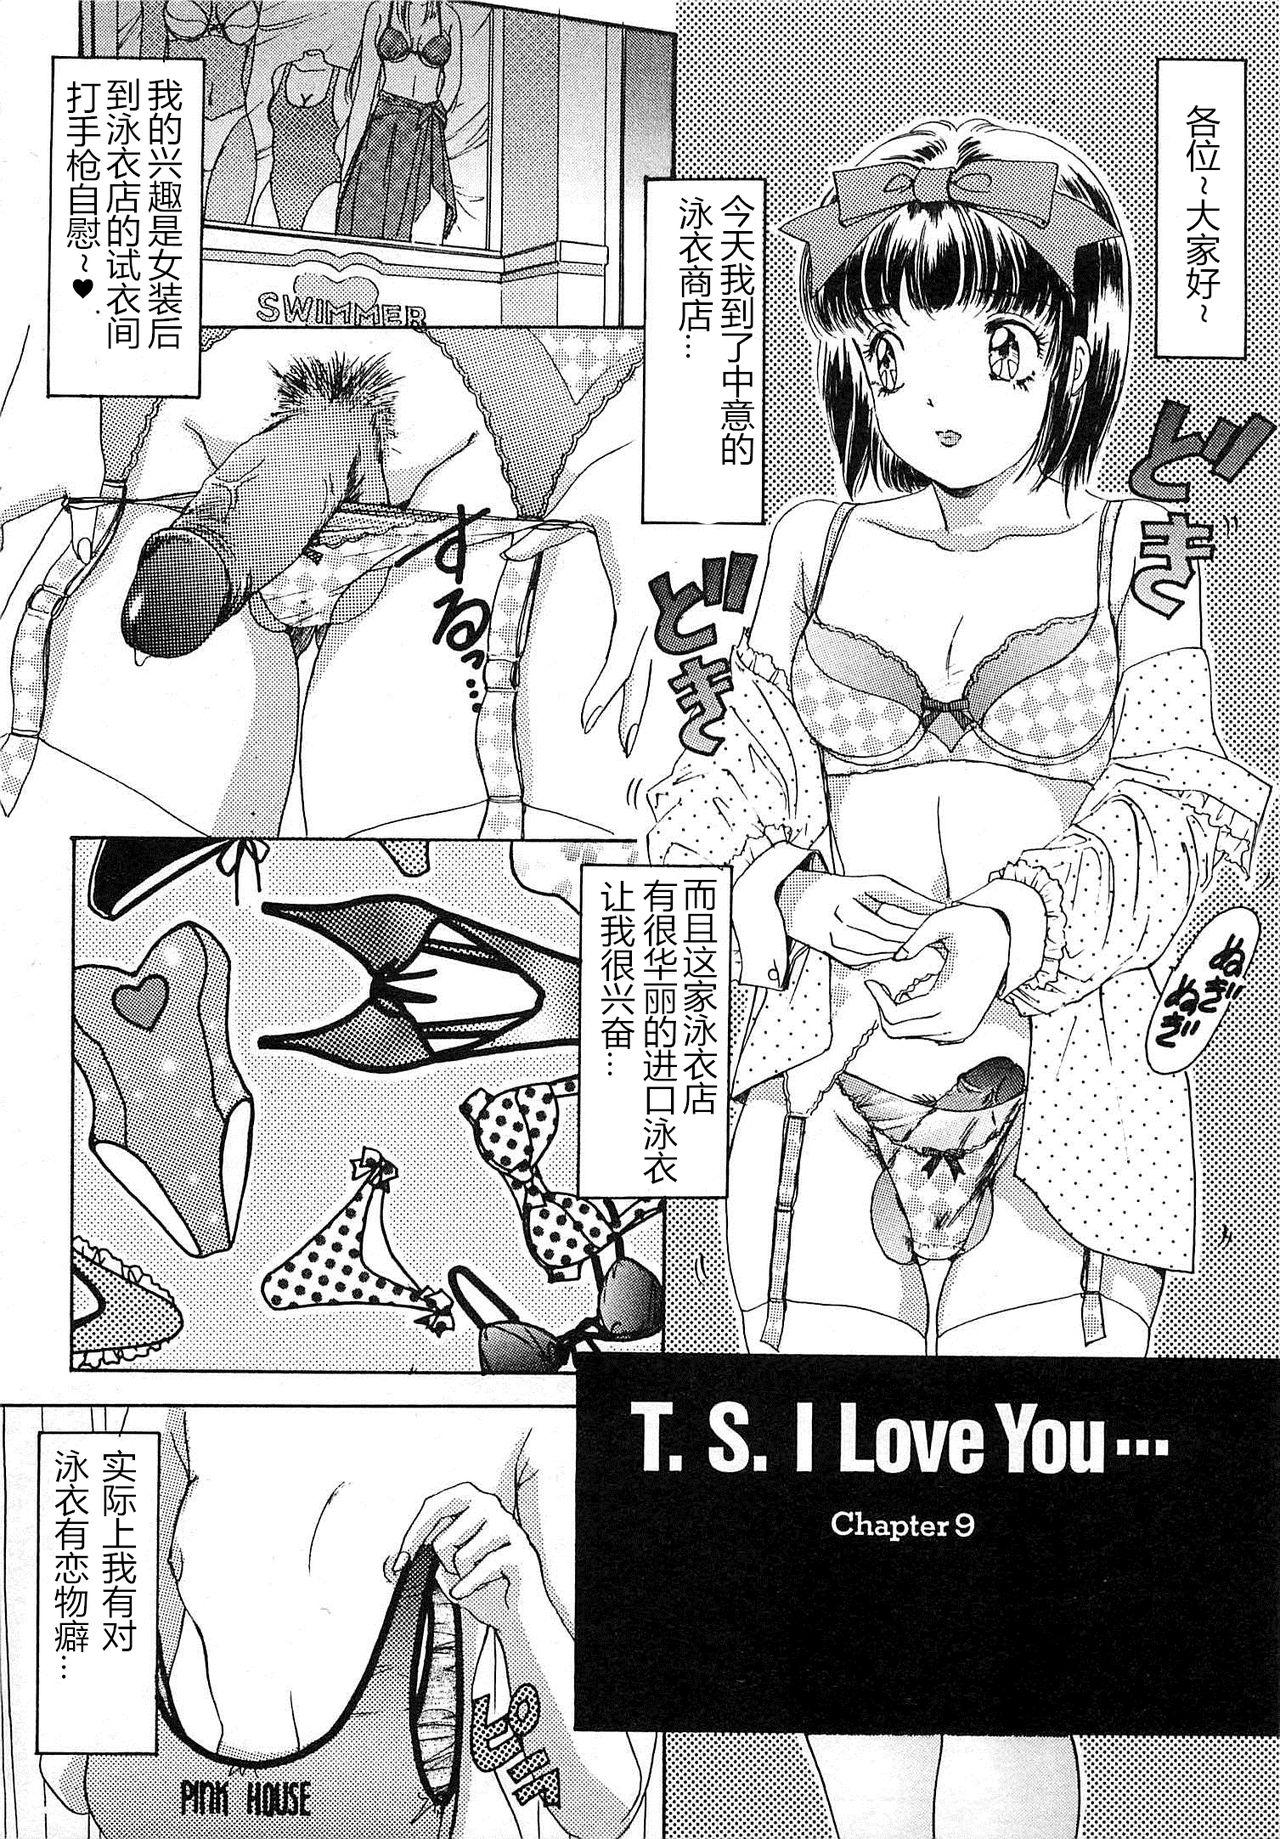 Police T.S. I LOVE YOU chapter 09 Italian - Page 2